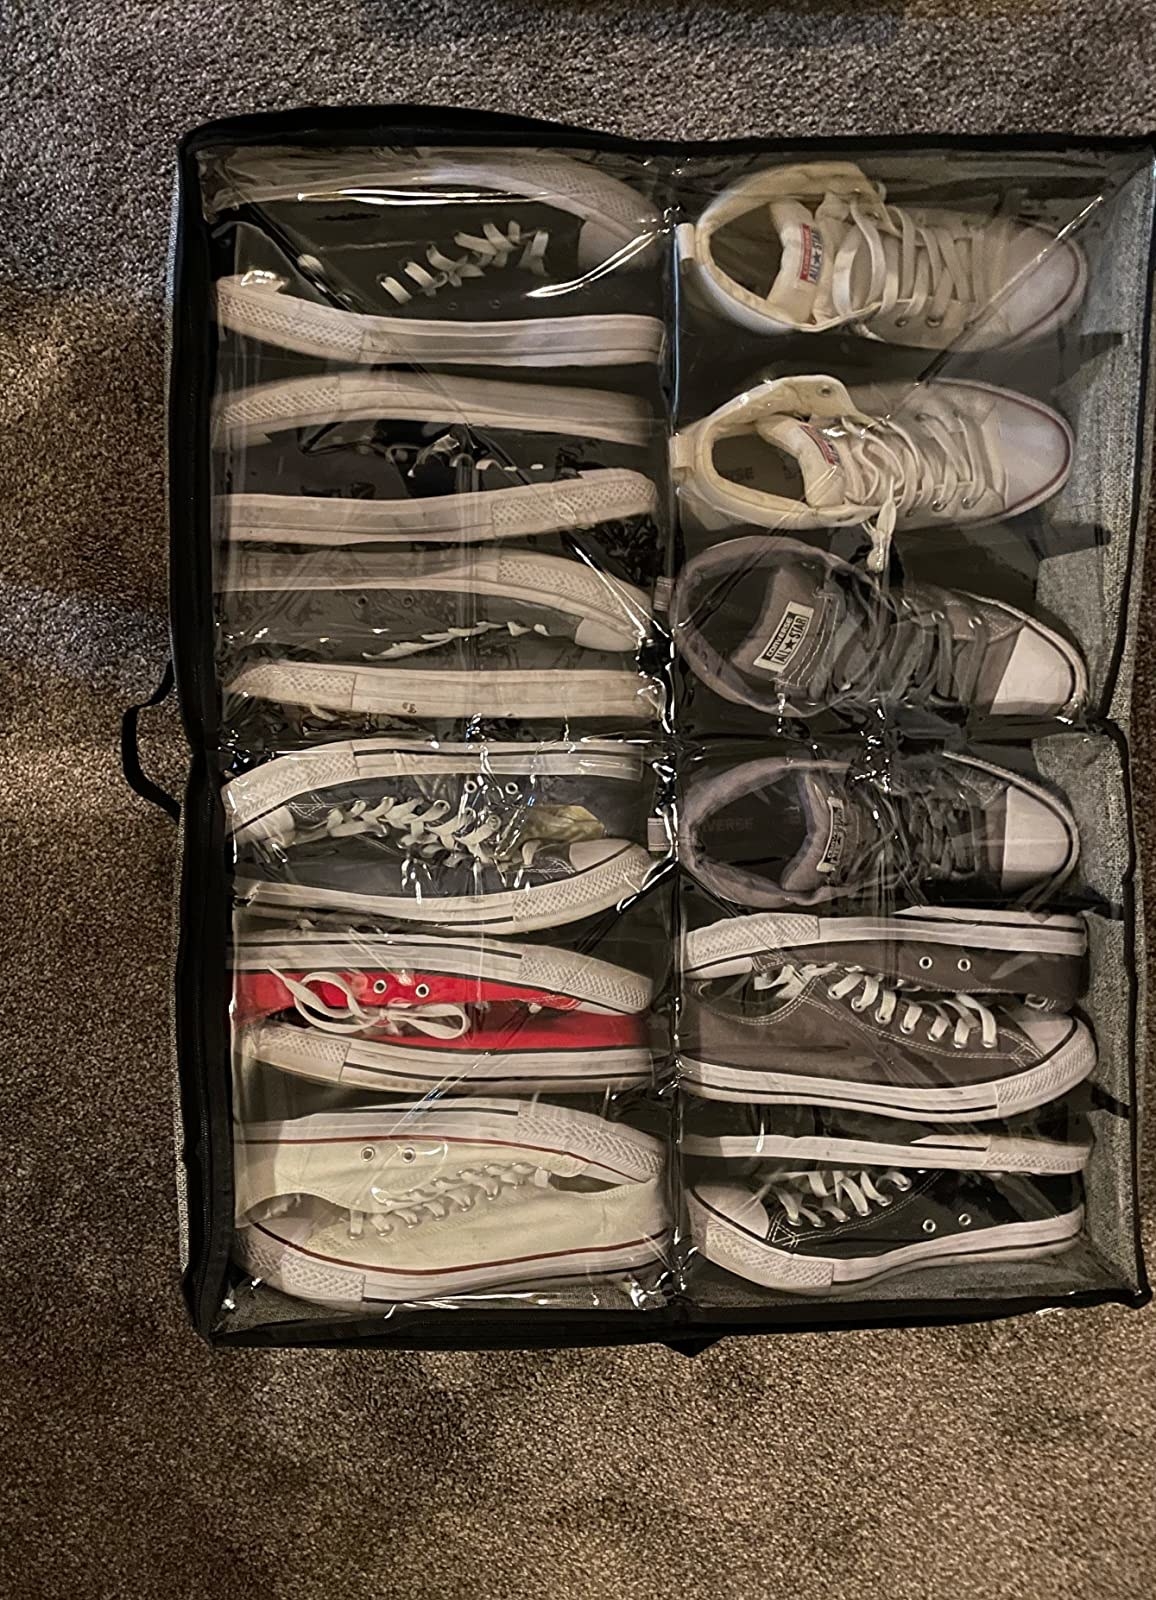 Reviewer image of shoe storage bag filled with sneakers